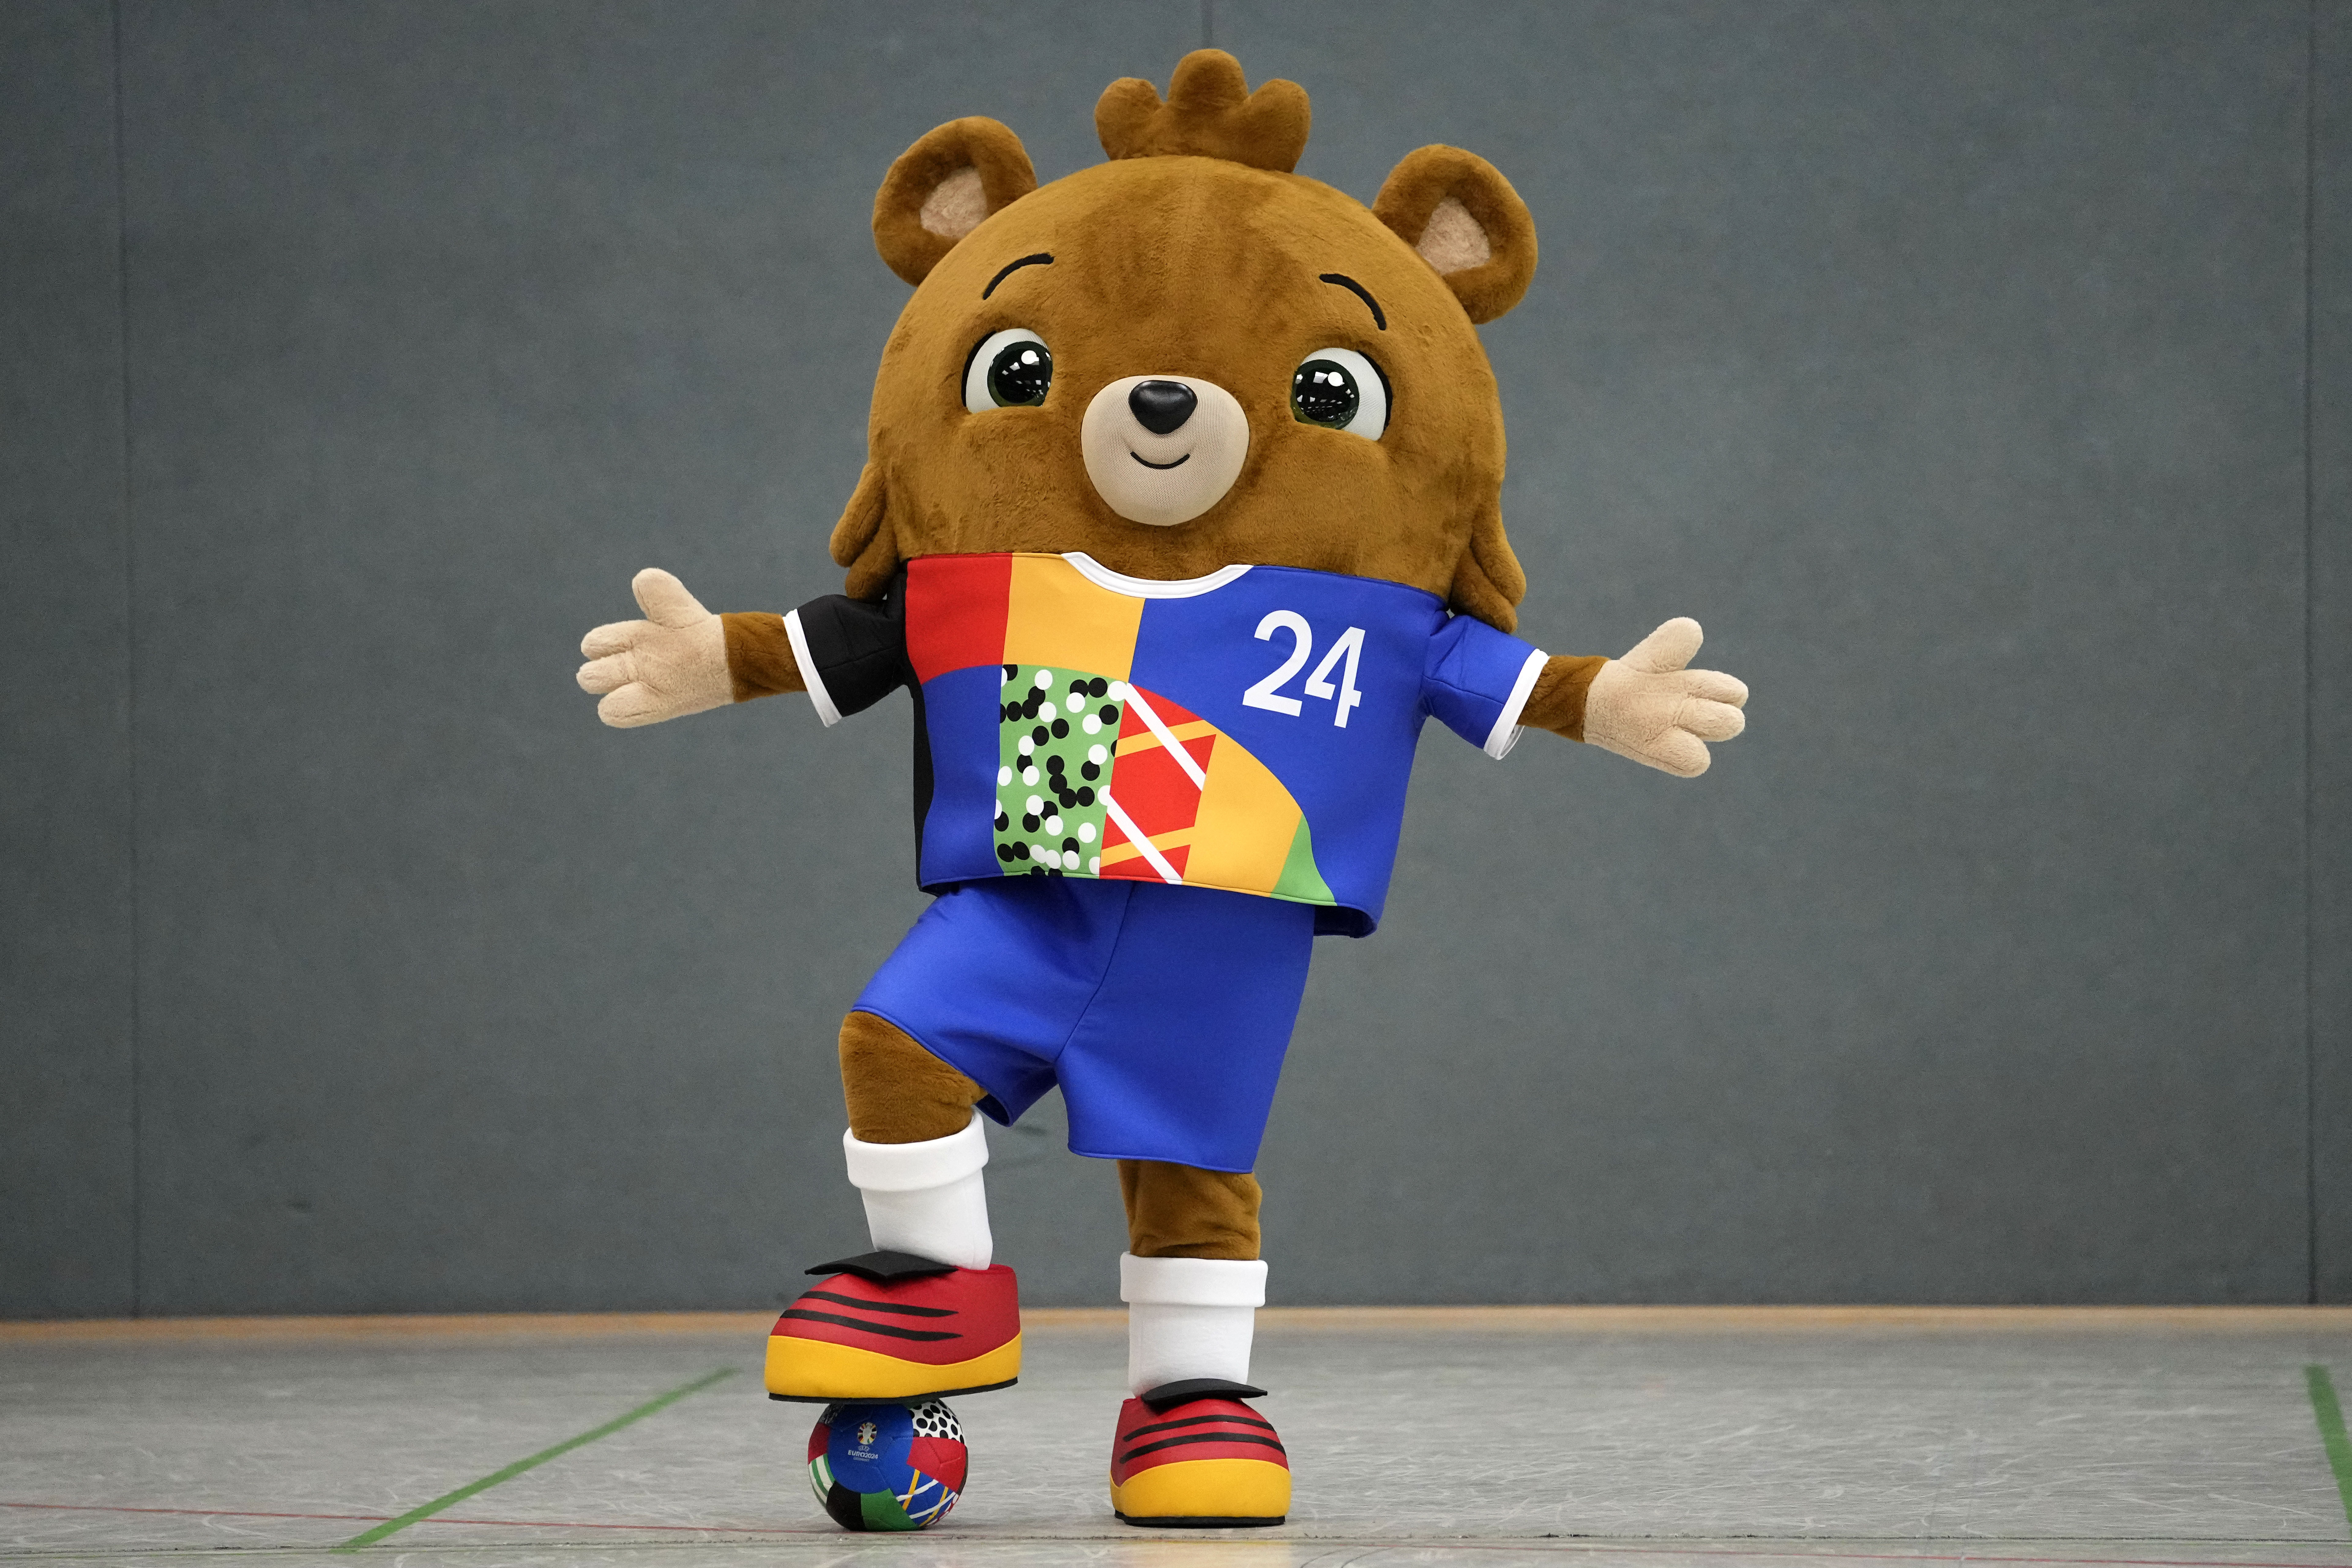 Germany unveils a teddy bear as the mascot for Euro 2024 but this